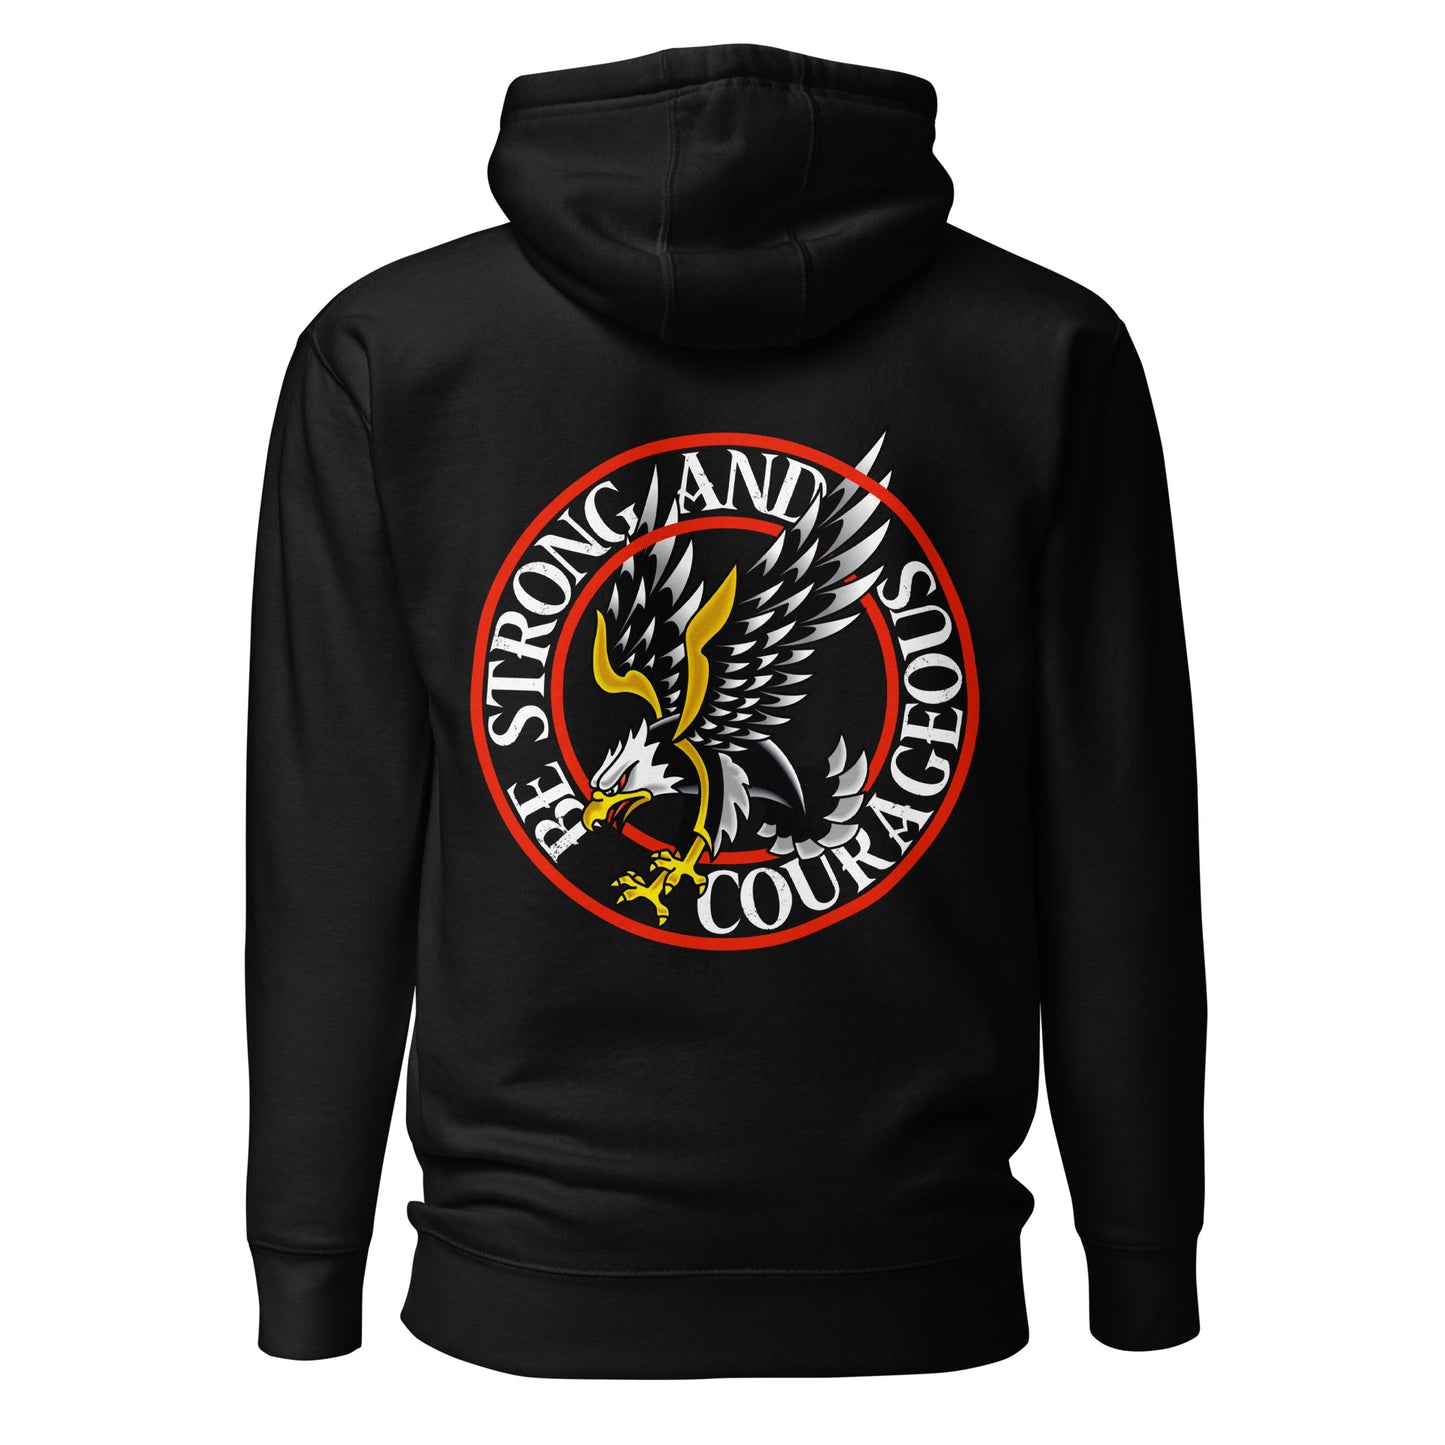 Be Strong & Courageous Hoodie - For Your Courage